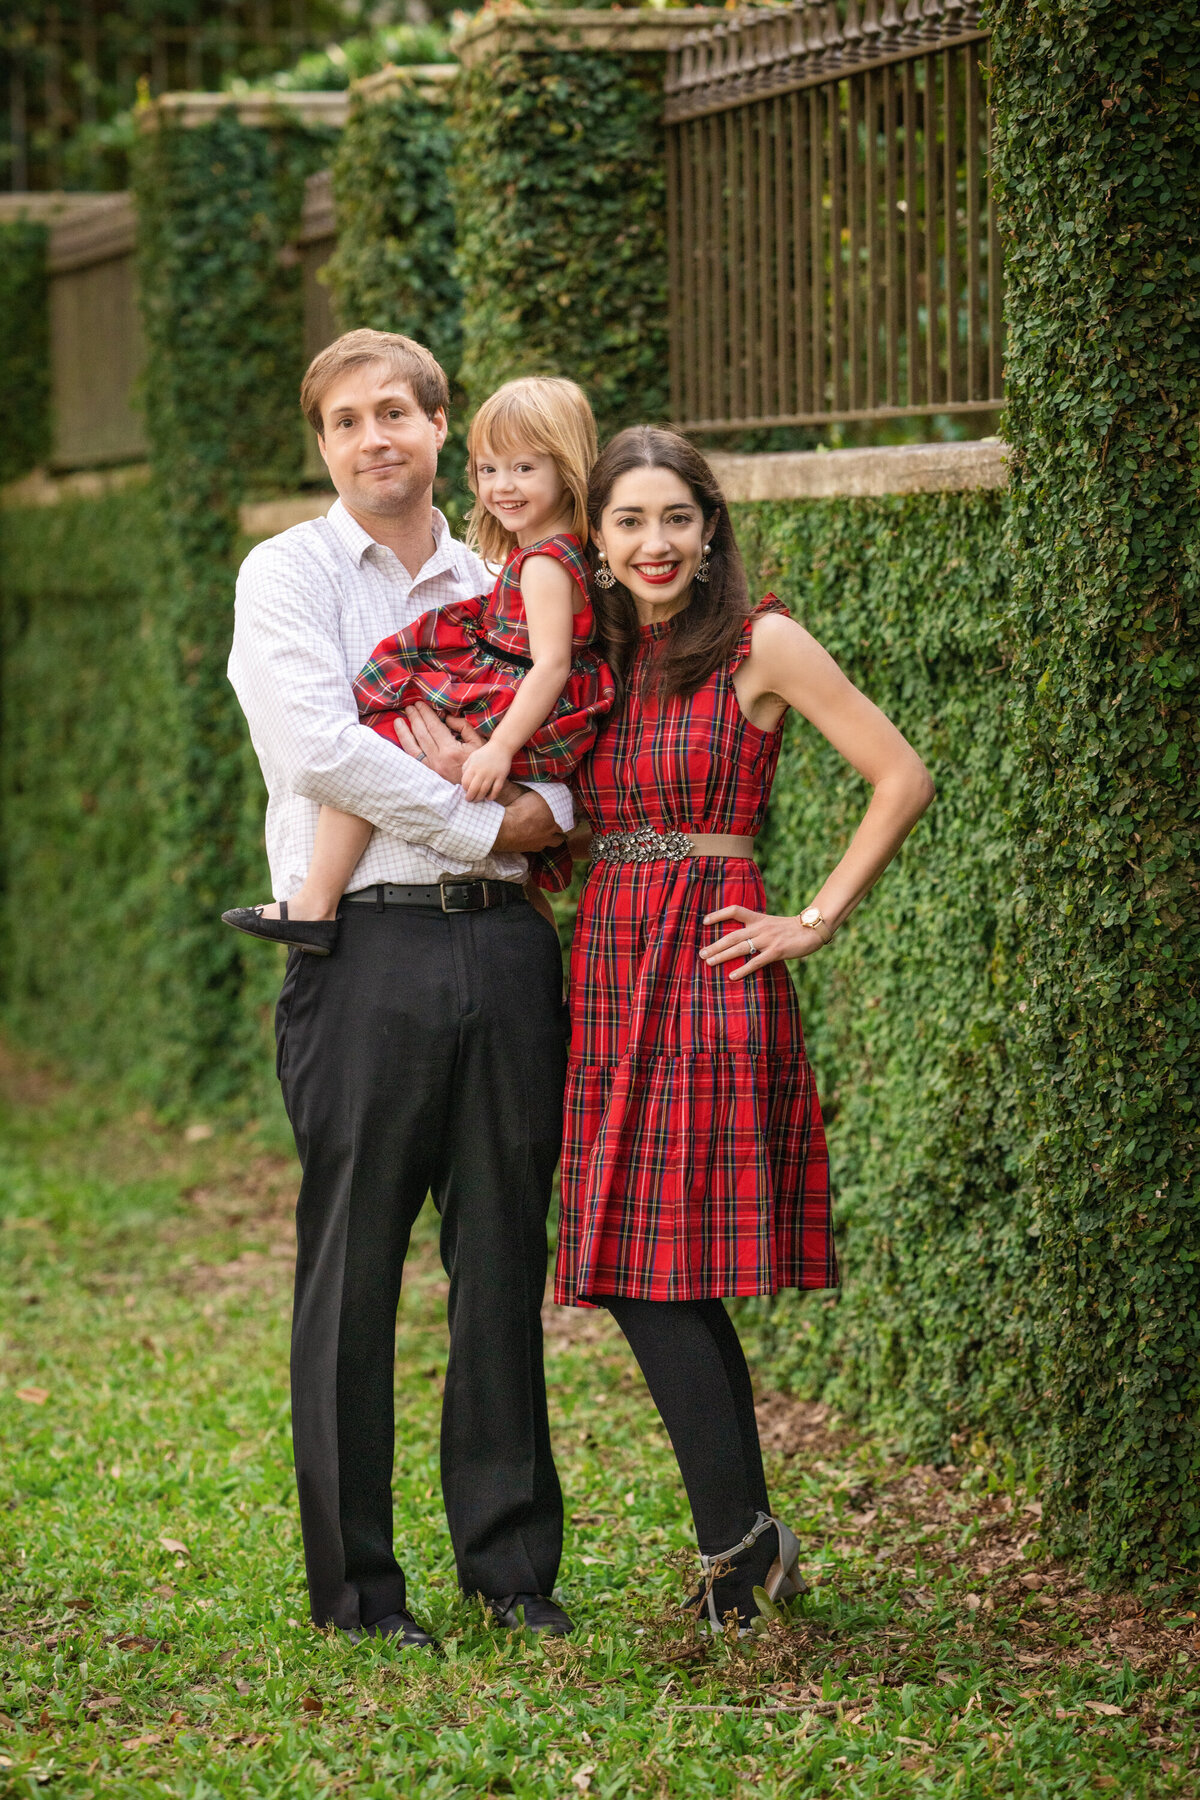 Mom and daughter are dressed in red plaid dresses.  Dad is wearing a white dress shirt and black pants.  He is holding the little girl.  They are standing in front of an ivy covered wall.